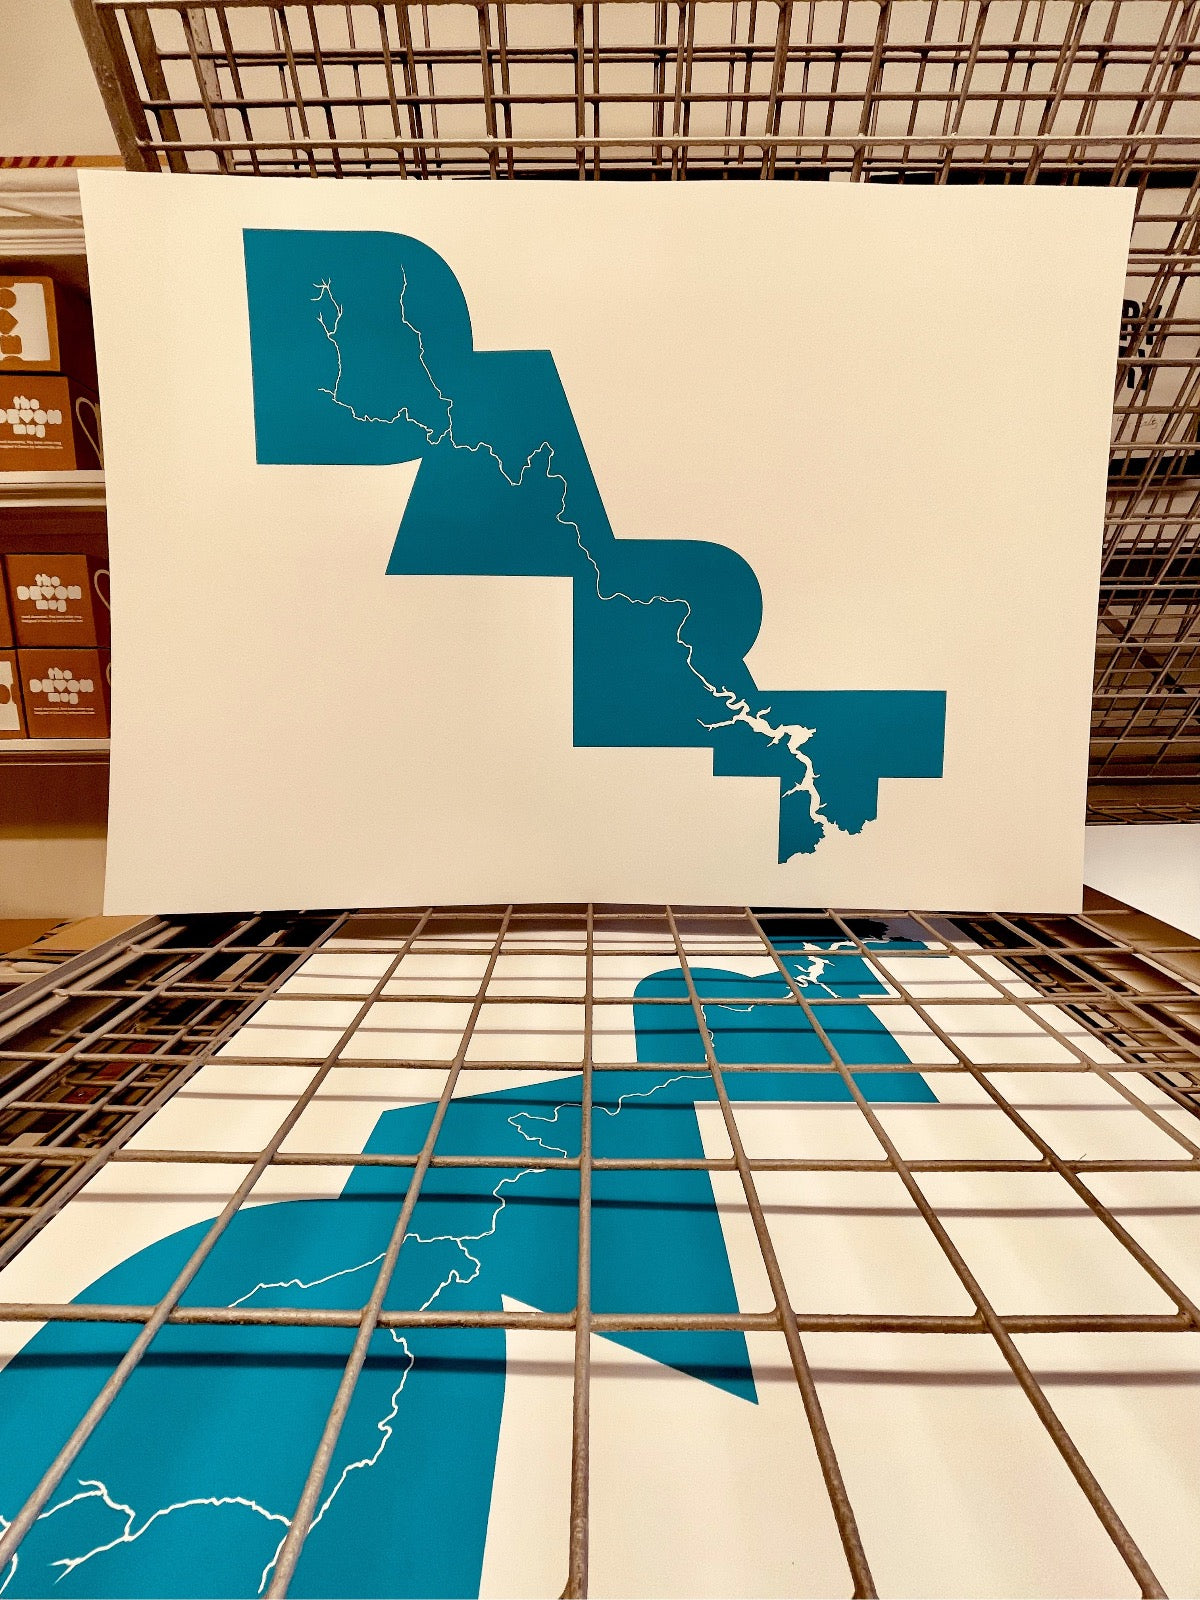 A2 white paper stood up on a mesh drying rack, shows a screenprinted design in teal blue ink - depicting the word DART diagonally placed from top left to bottom right - and the shape of the river (Dart) winds it way through the typography. Another print can be seen in the rack below the mesh.